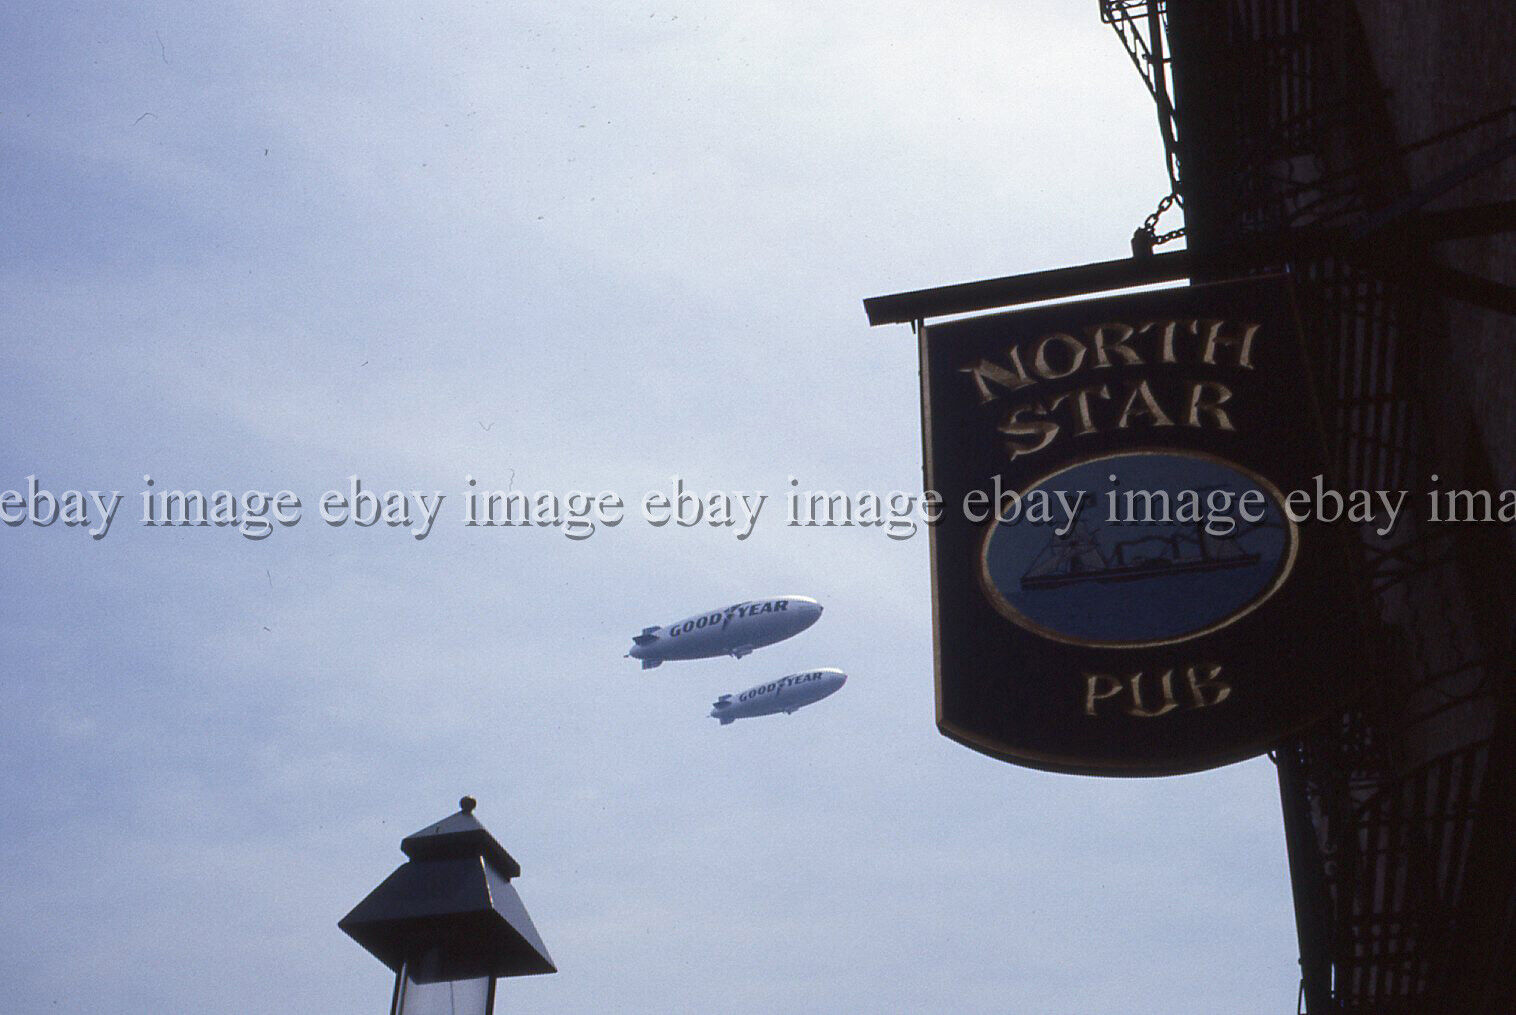 Goodyear Blimps Over North Star Pub NYC (2) 1980's VTG 35mm Slides Photos